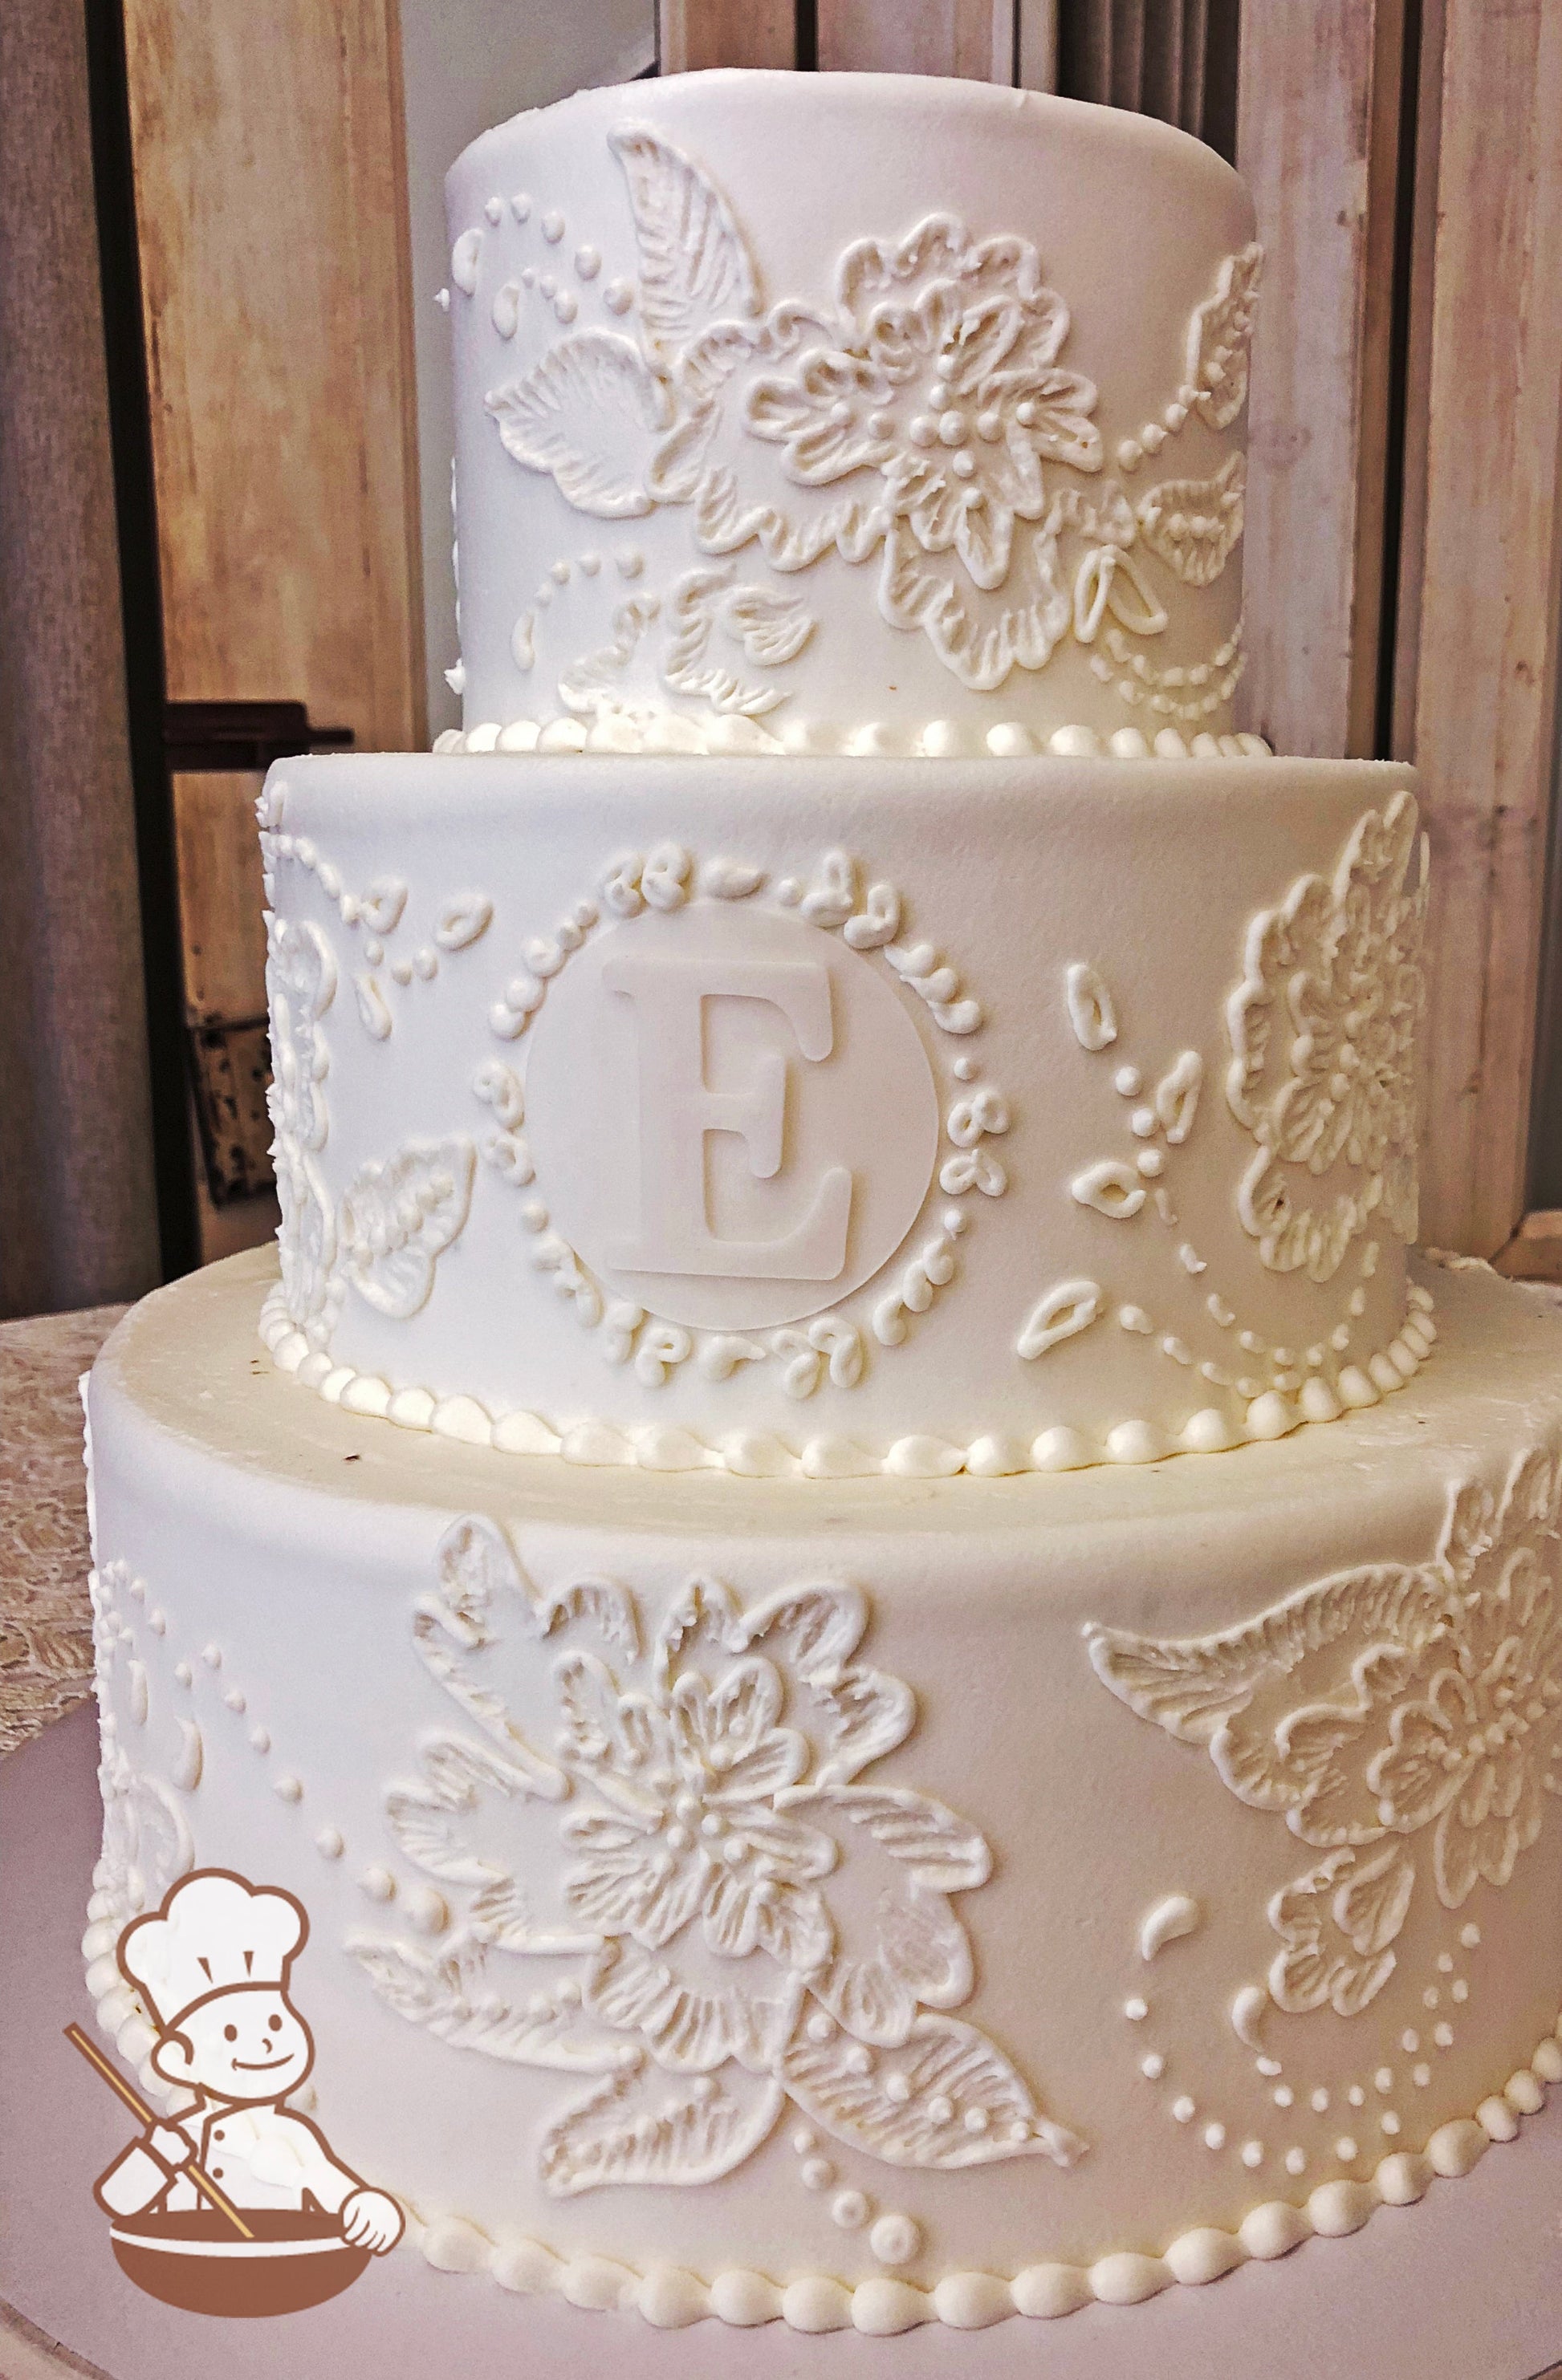 Round buttercream iced cake with hand brushed florals and fondant monogram.